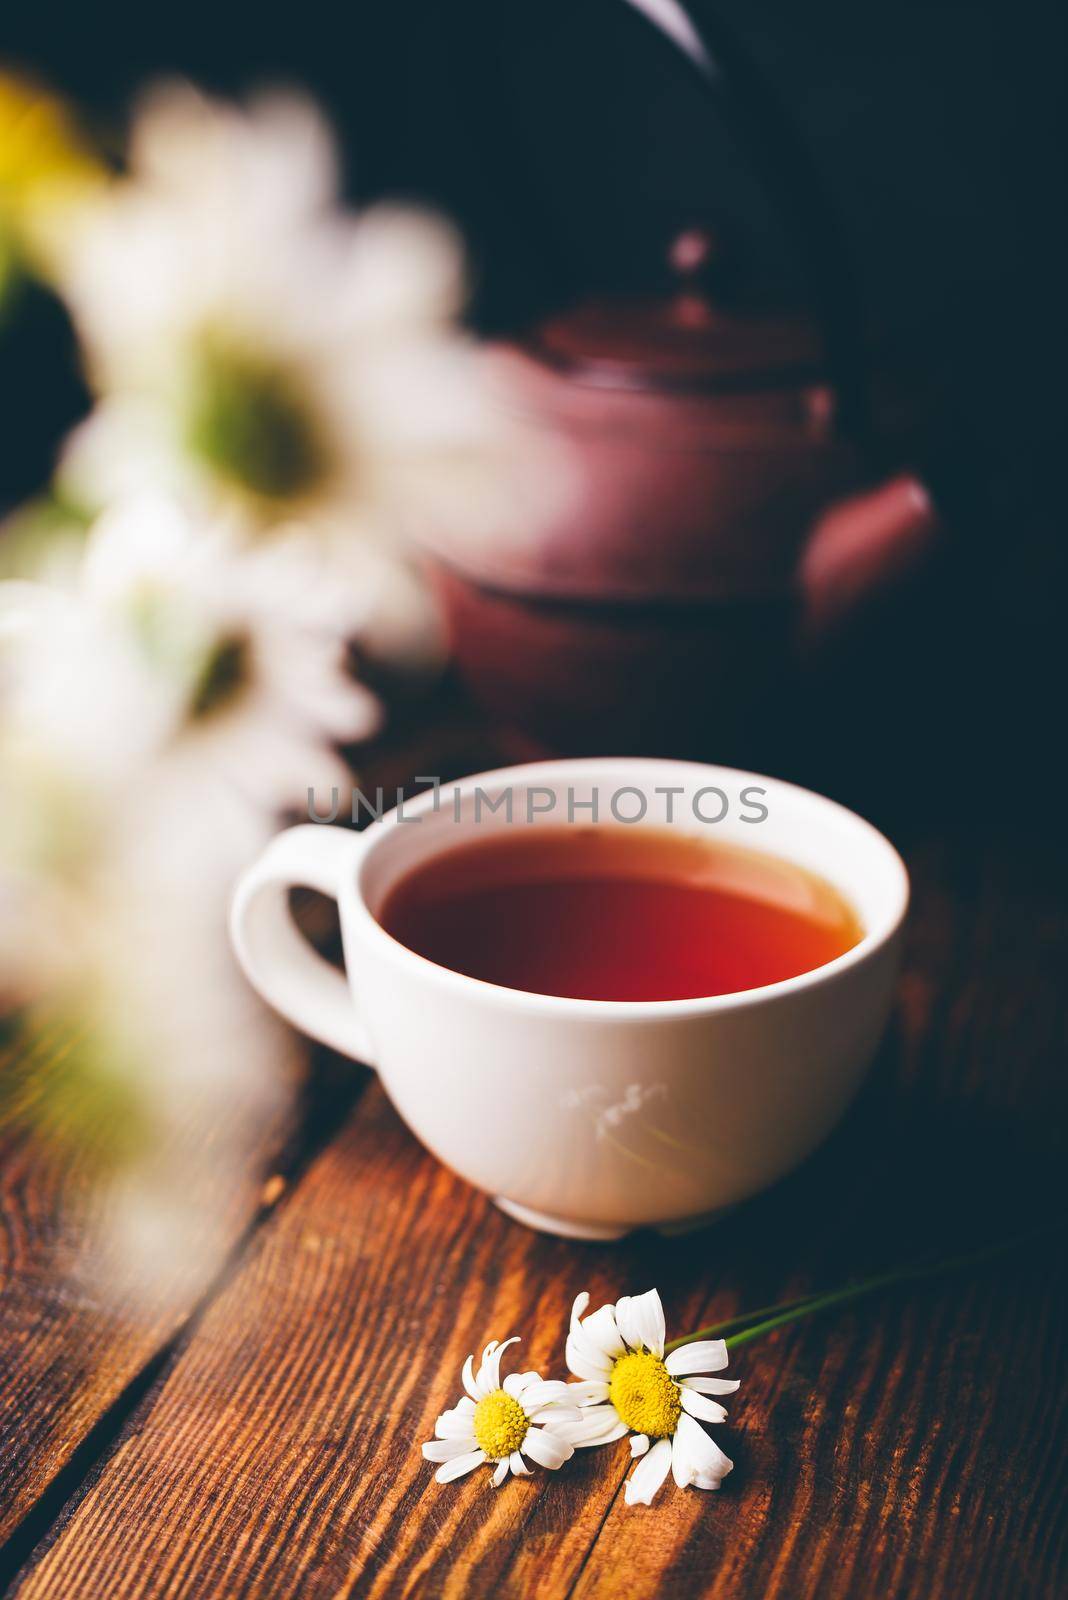 White cup of tea and chamomile flowers on wooden table. Blurred bouquet on foreground